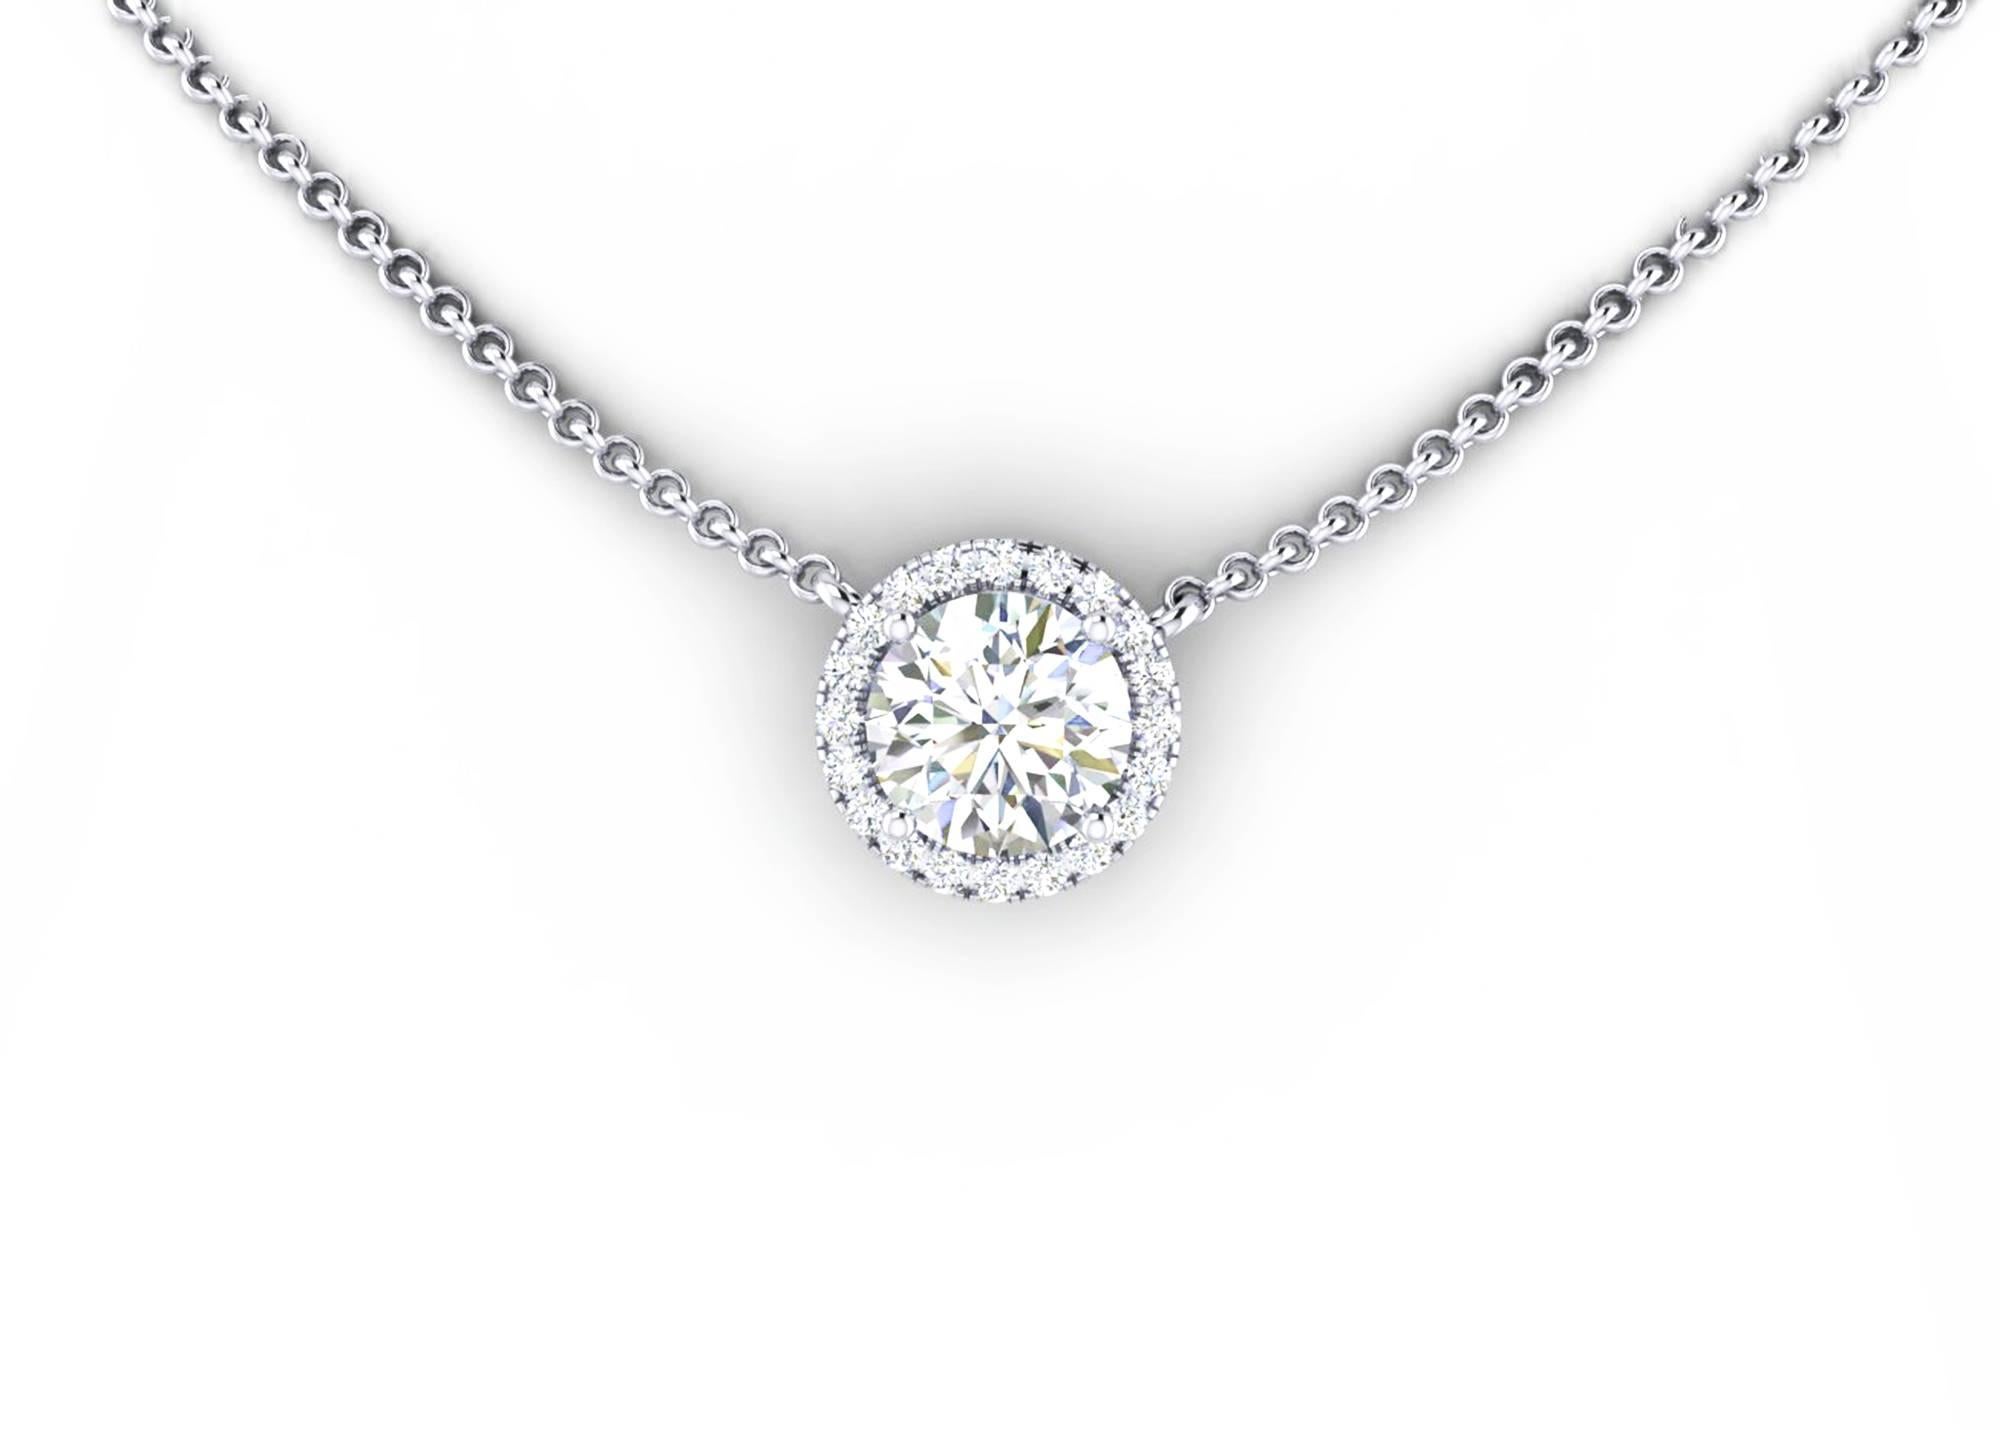 Women's 1.06 carats GIA Certified Round Diamond Halo Platinum Pendant Necklace For Sale